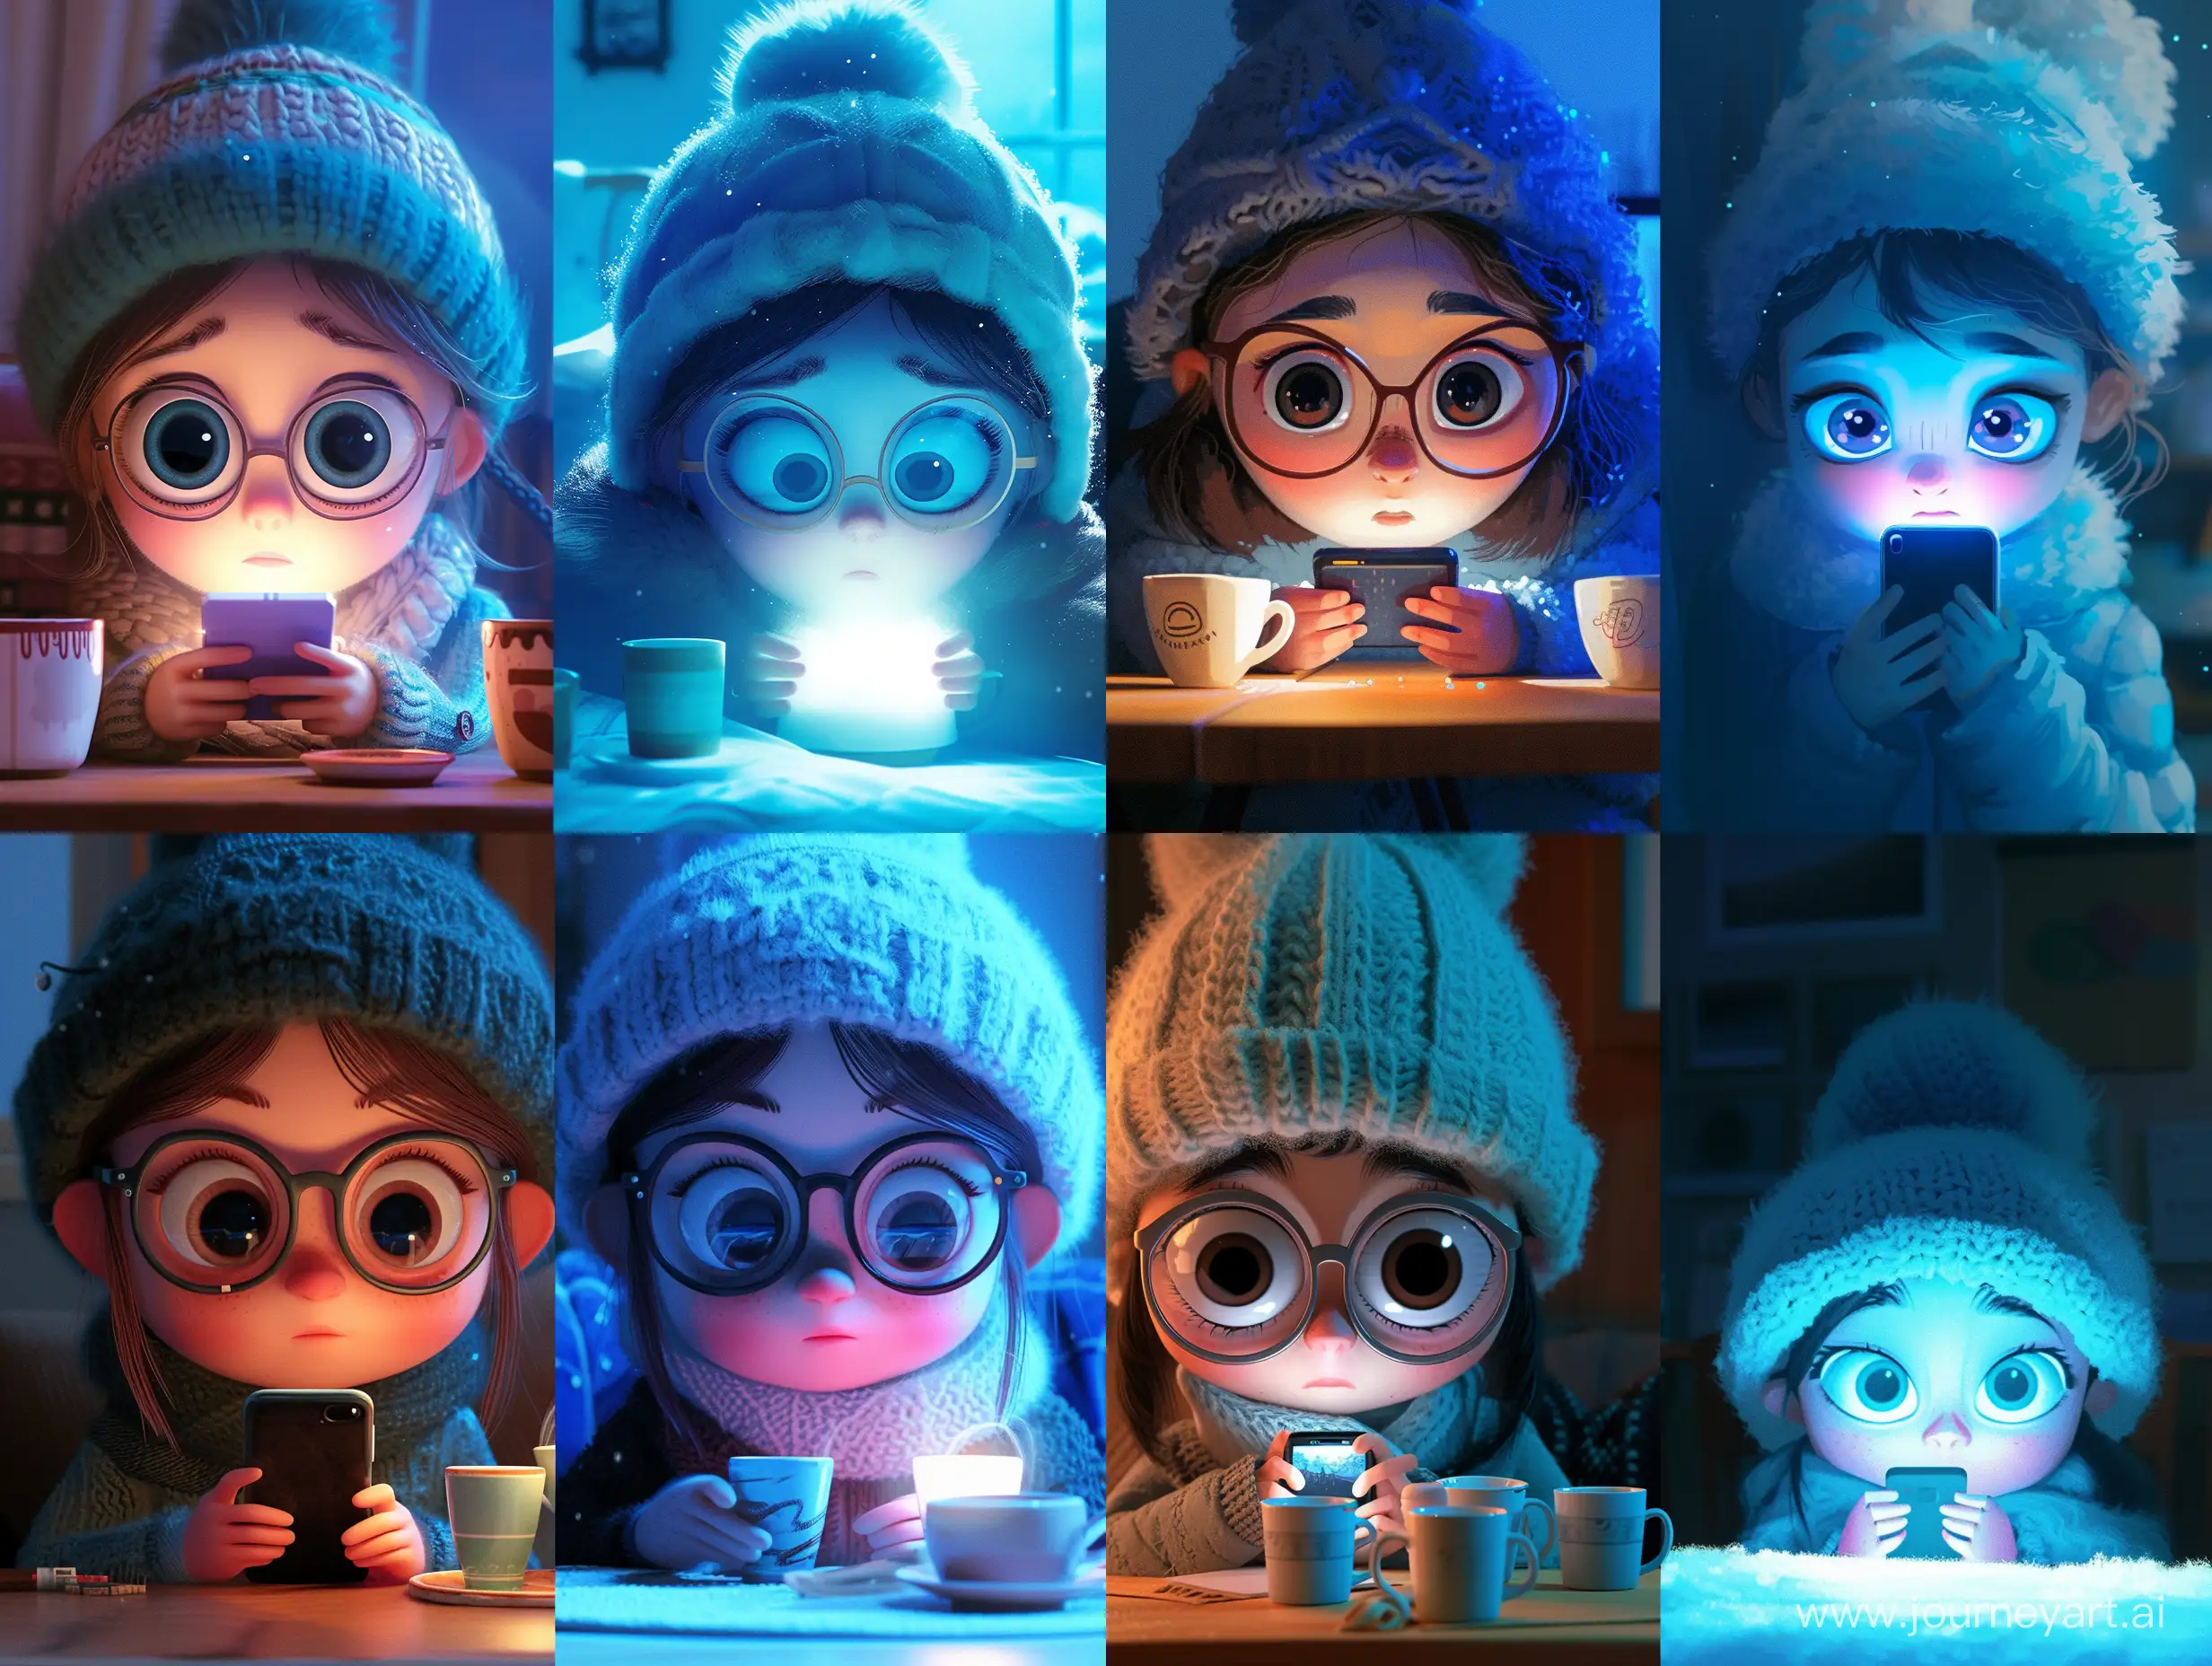 On the left side of the image, we see an animated character — a girl with big eyes, wearing glasses and a warm winter accessory on her head, possibly a hat. She is in a cozy setting, looking at a smartphone, holding it in her hands. In front of her, there are cups on the table, reminiscent of a cafe or a cozy evening at home. The lighting creates a soft and warm light, emphasizing the comfort and seclusion of the scene. Overall, the image has soft tones and a pleasant color palette, radiating warmth and tranquility. Her face is illuminated by a soft blue-pink light, creating a contrast with the rest of the image, which is painted in blue tones. --v 6 --ar 4:3 --no 93219